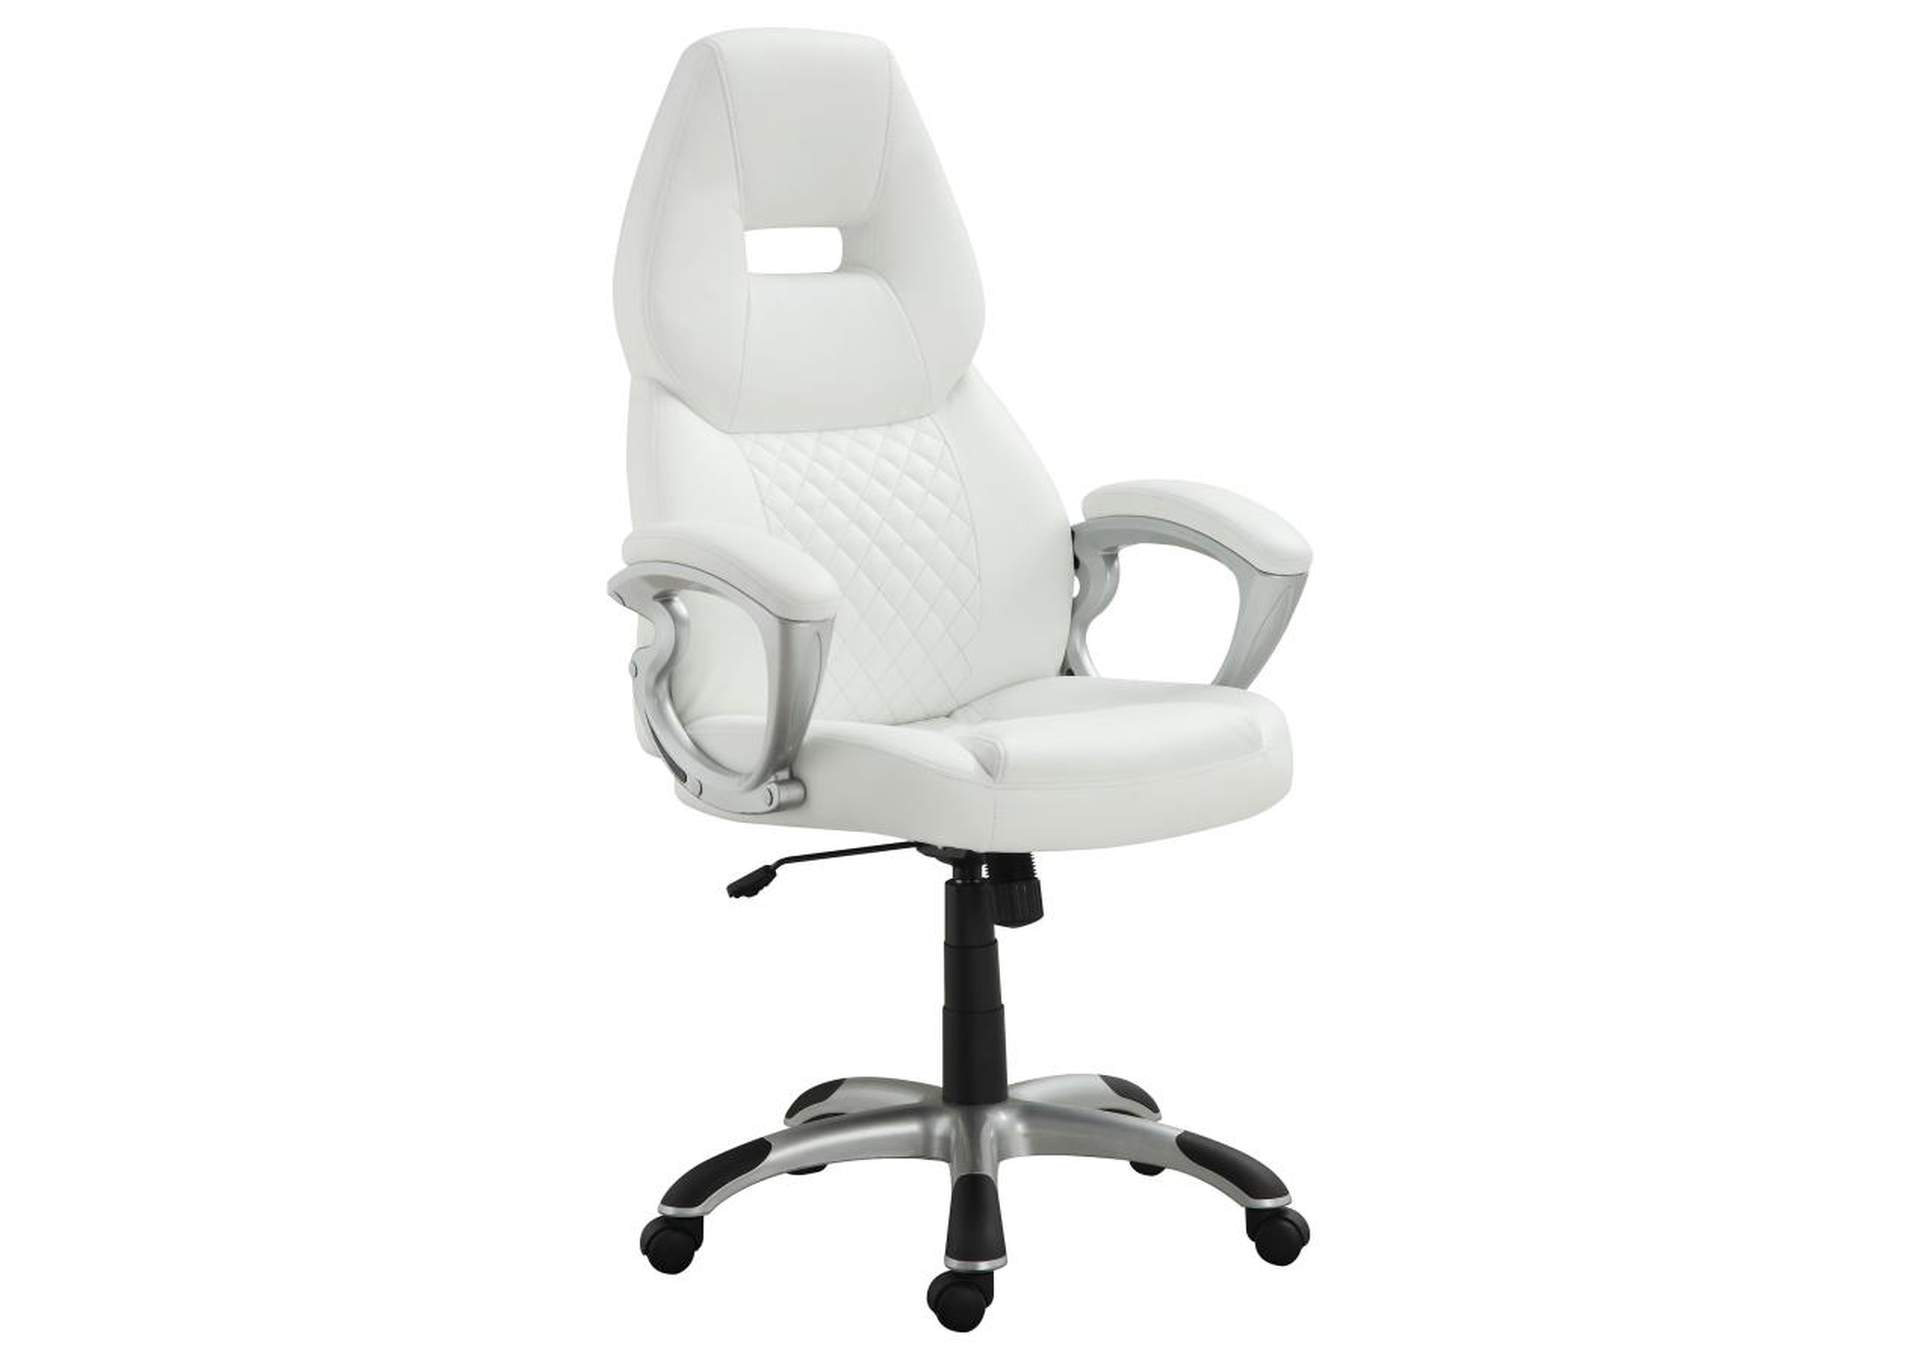 Adjustable Height Office Chair White and Silver,Coaster Furniture